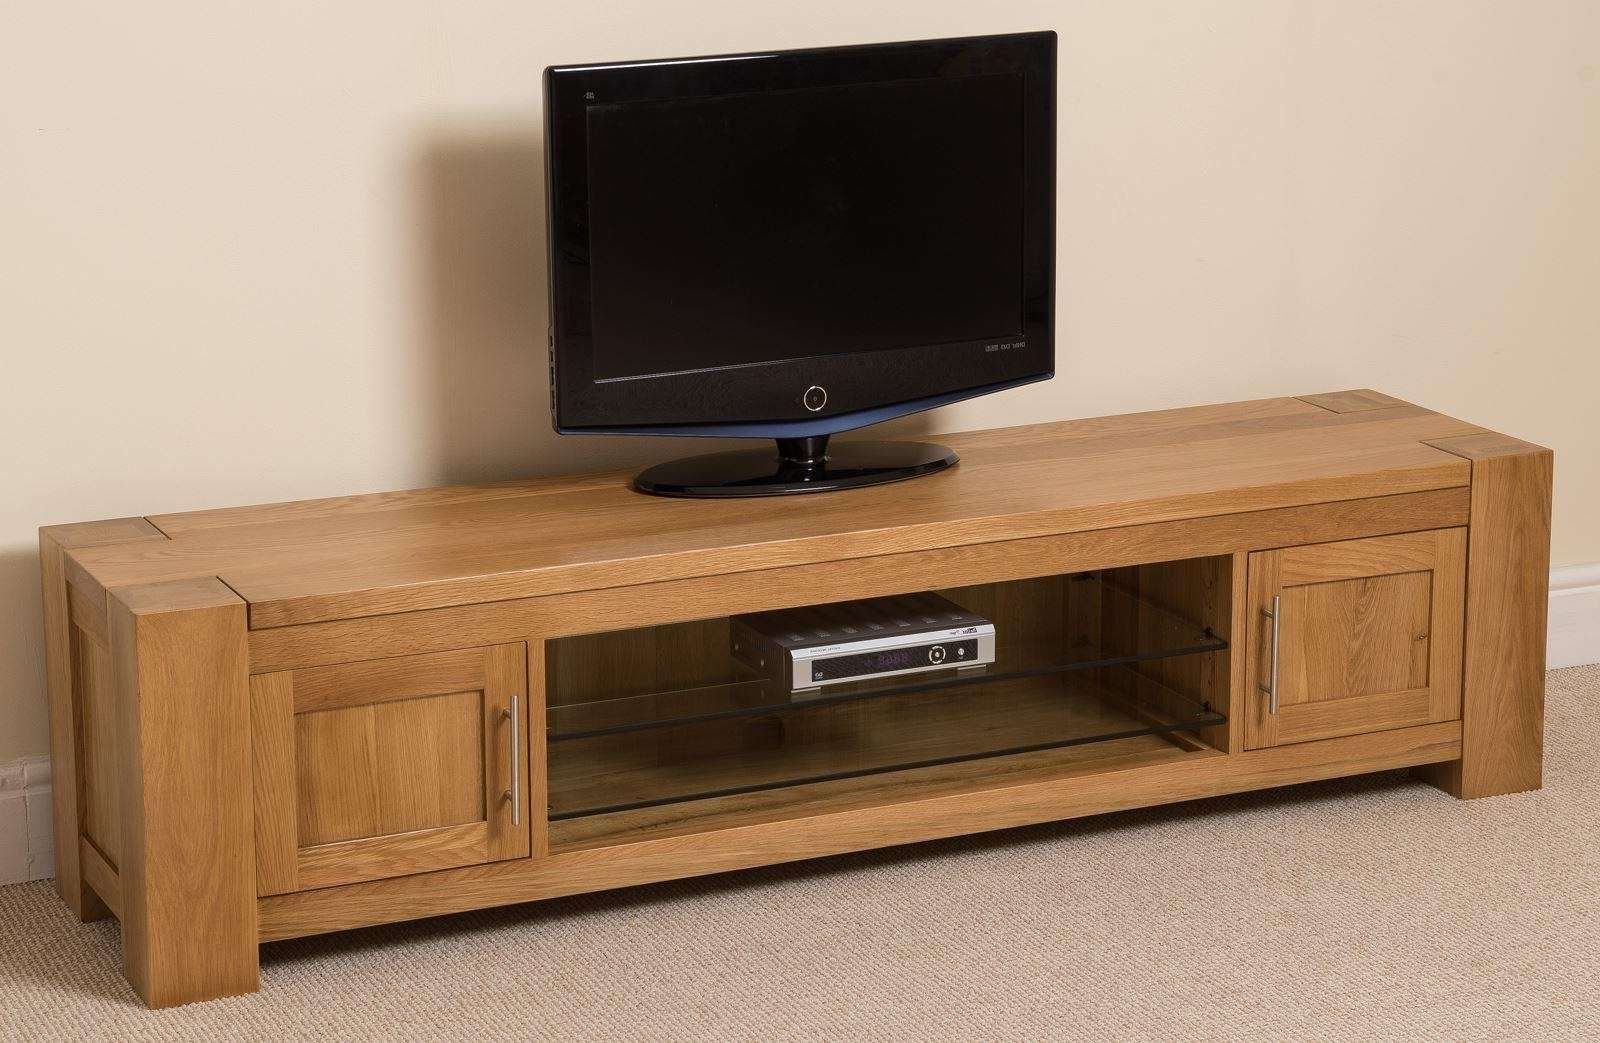 Kuba Solid Widescreen Tv Cabinet | Oak Furniture King Within Widescreen Tv Cabinets (View 1 of 20)